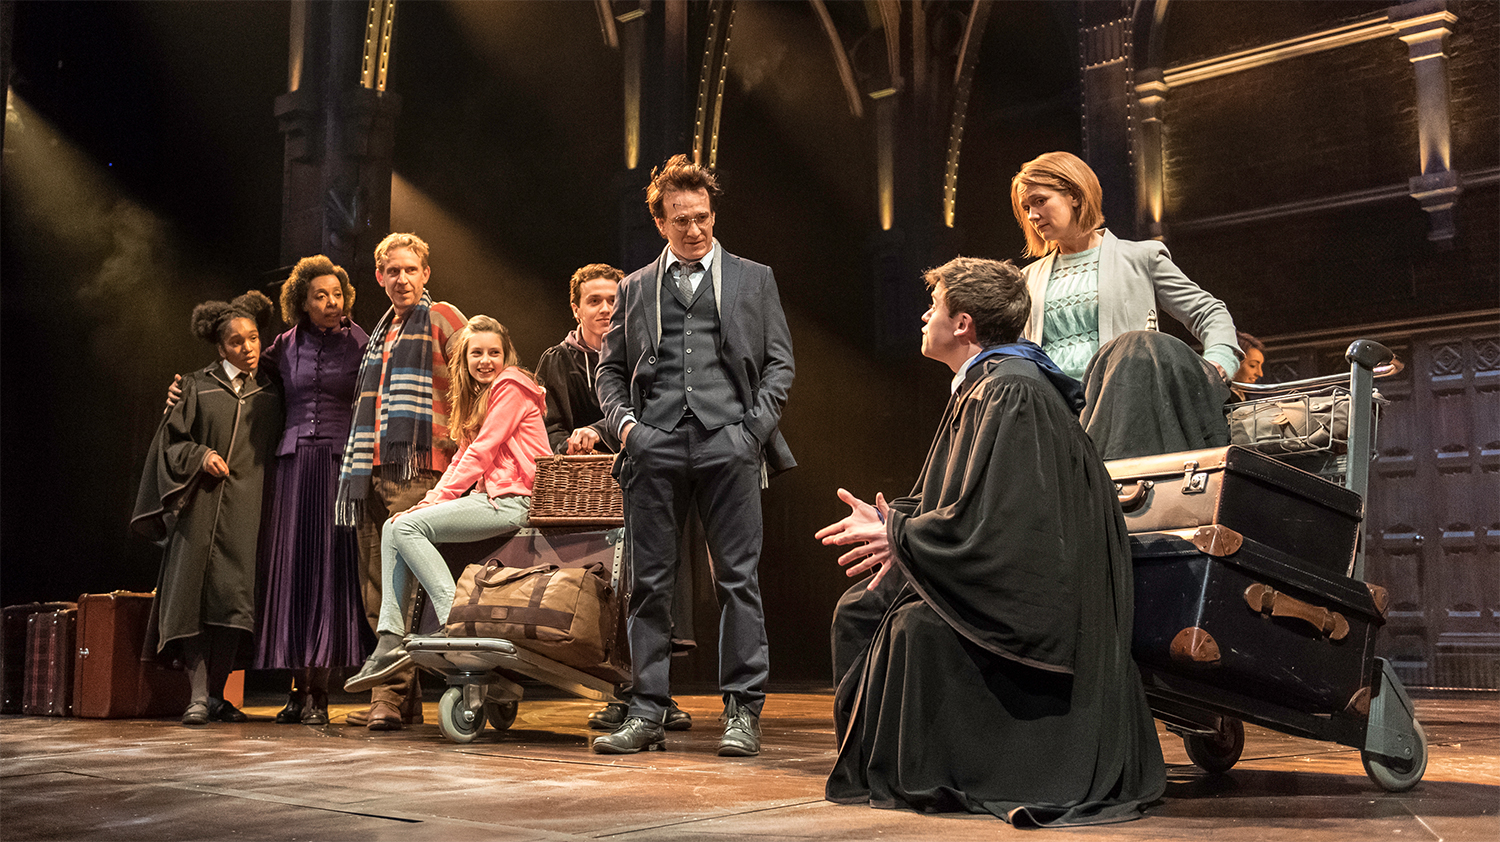 The main cast of Harry Potter and the Cursed Child, a notable nerd theatre show